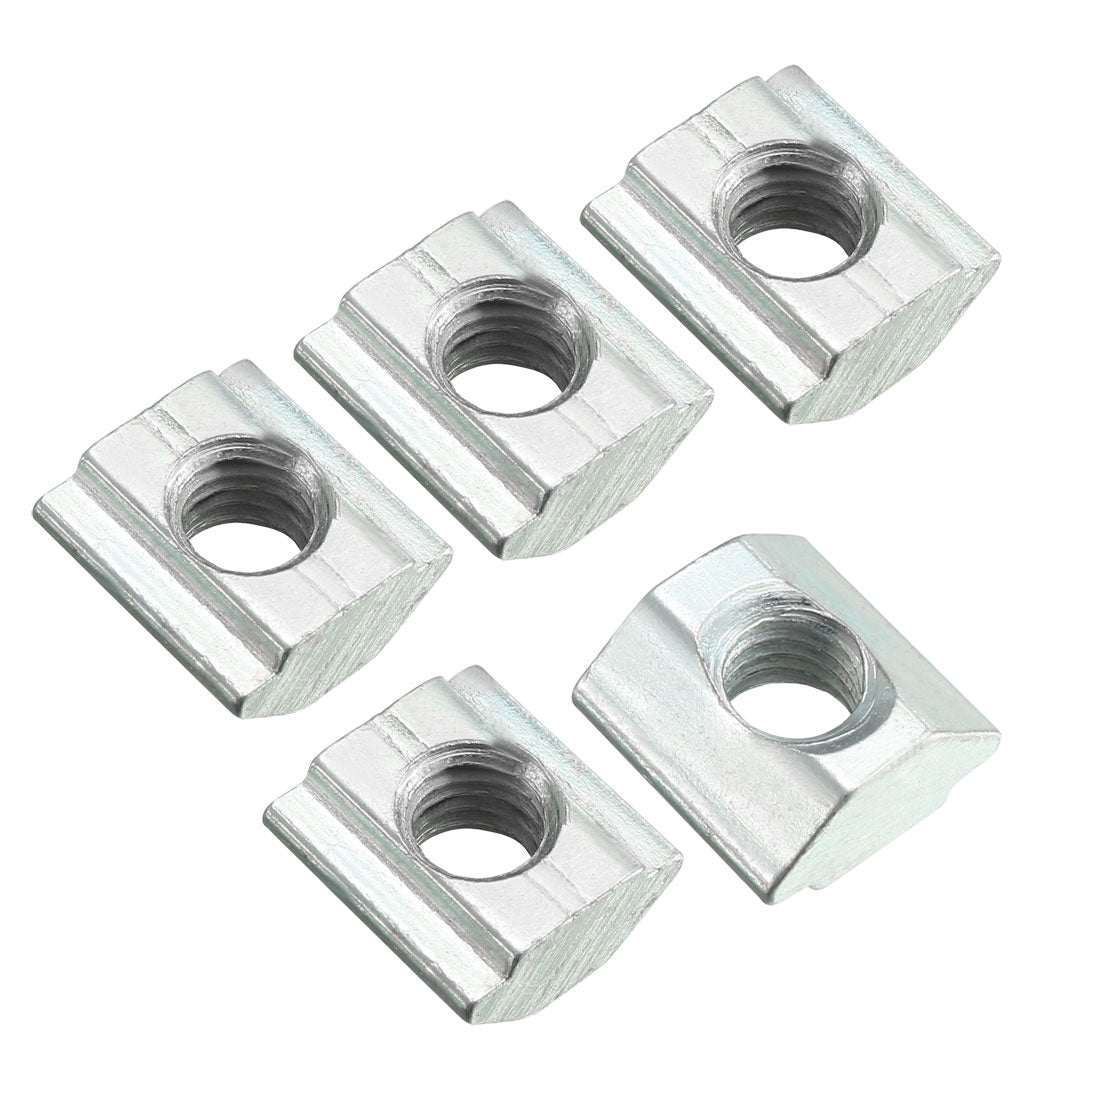 Uxcell Uxcell Slide in T-Nut, M5 Threaded for 2020 Series Aluminum Extrusions Profile 12pcs